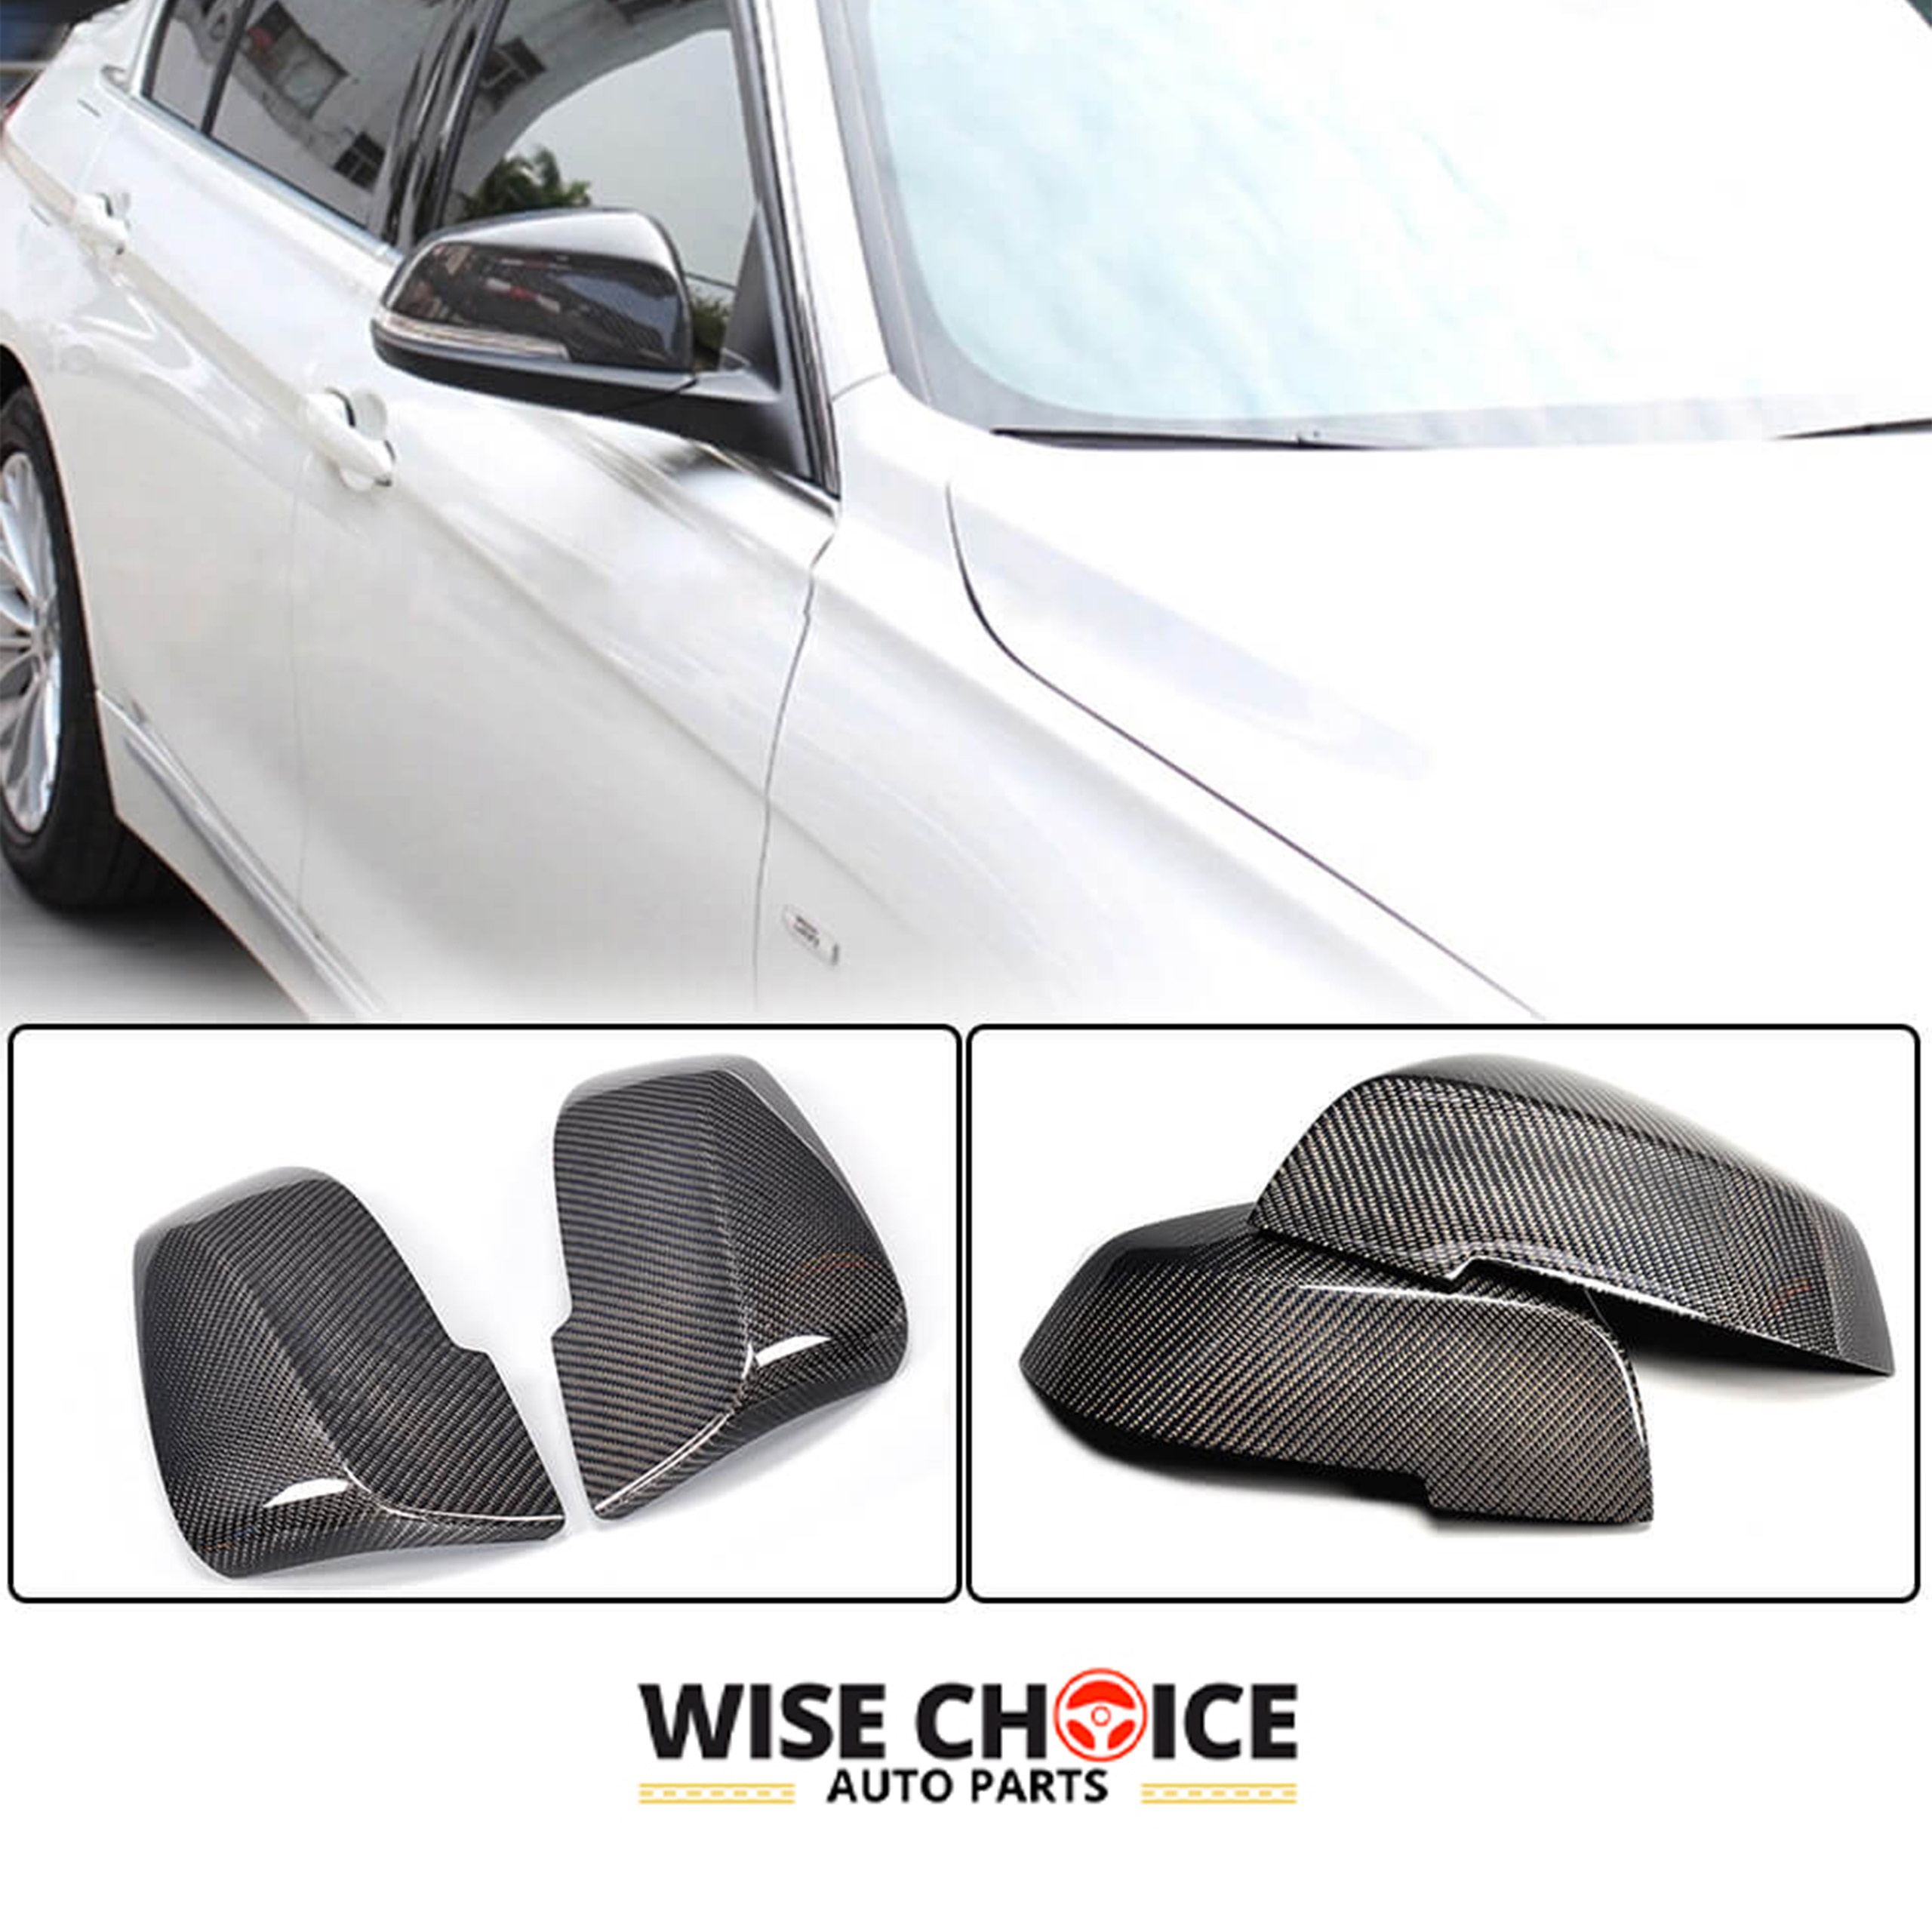 BMW Carbon Fiber Mirror Covers attached to a BMW Sedan Series vehicle, showcasing its glossy finish and deep pattern.